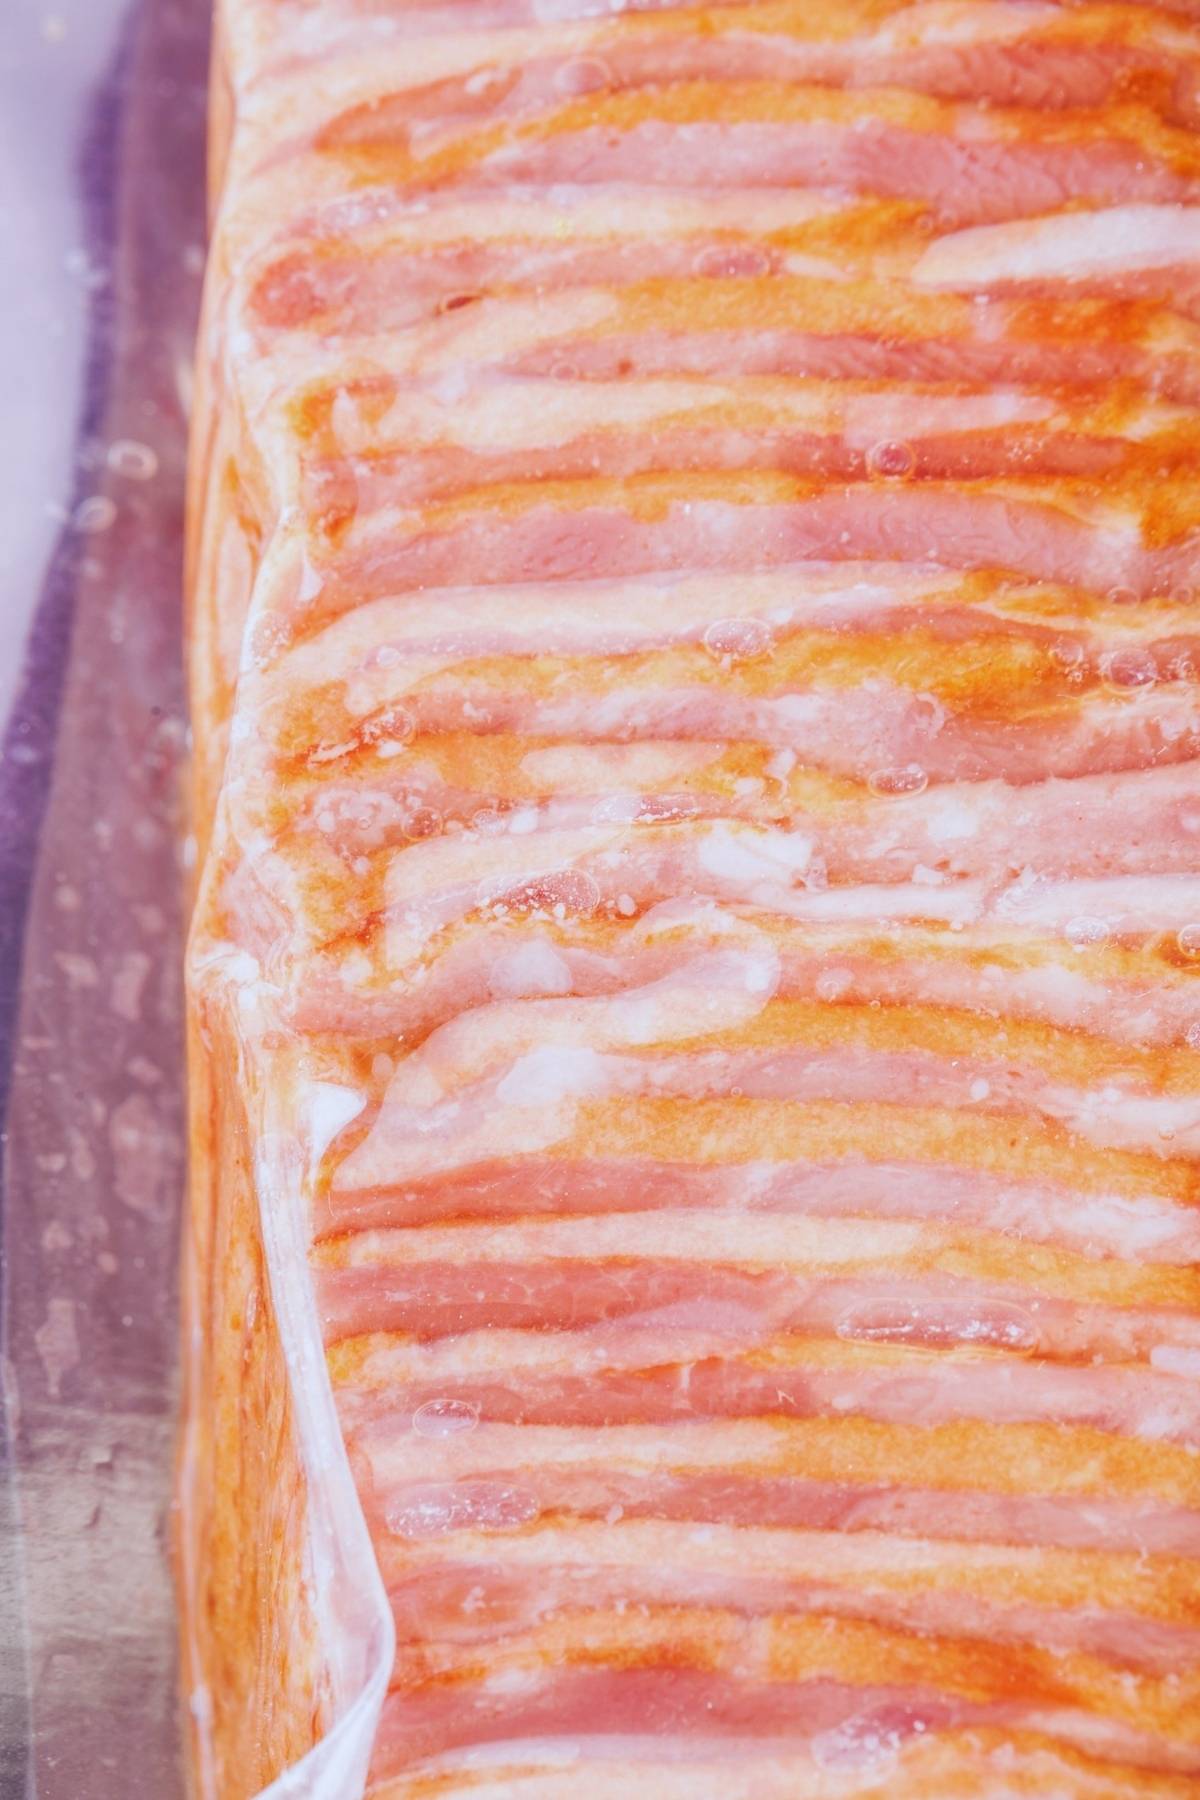 Bacon can make a quick breakfast or be transformed into a delicious dish. How long does bacon last in the fridge? It depends on whether the package is opened or unopened, and whether the bacon is raw or cooked.